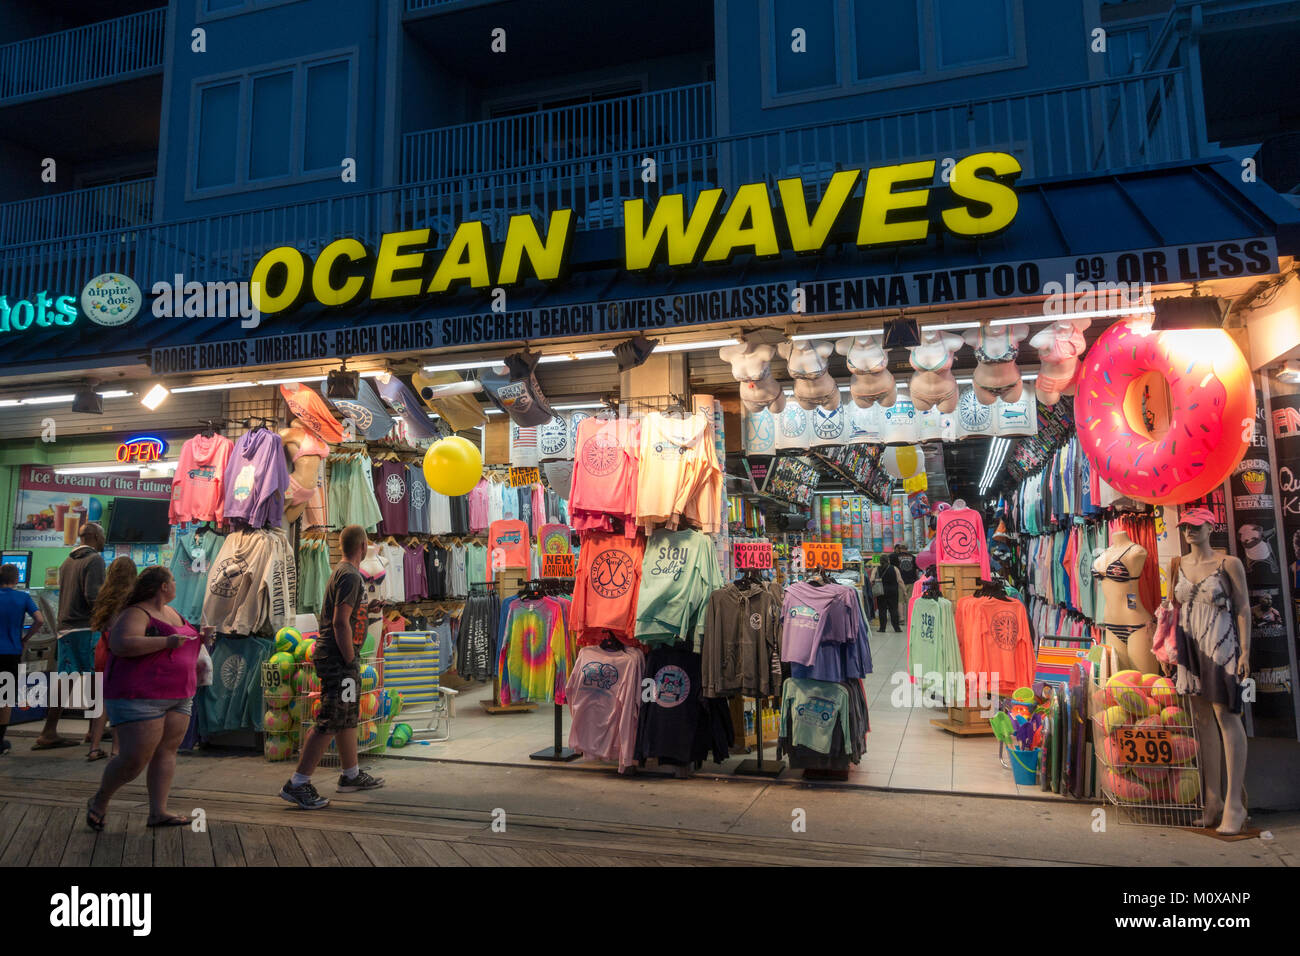 The Ocean Waves beach clothing and souvenir store on the Boardwalk in Ocean City, Maryland, United States. Stock Photo